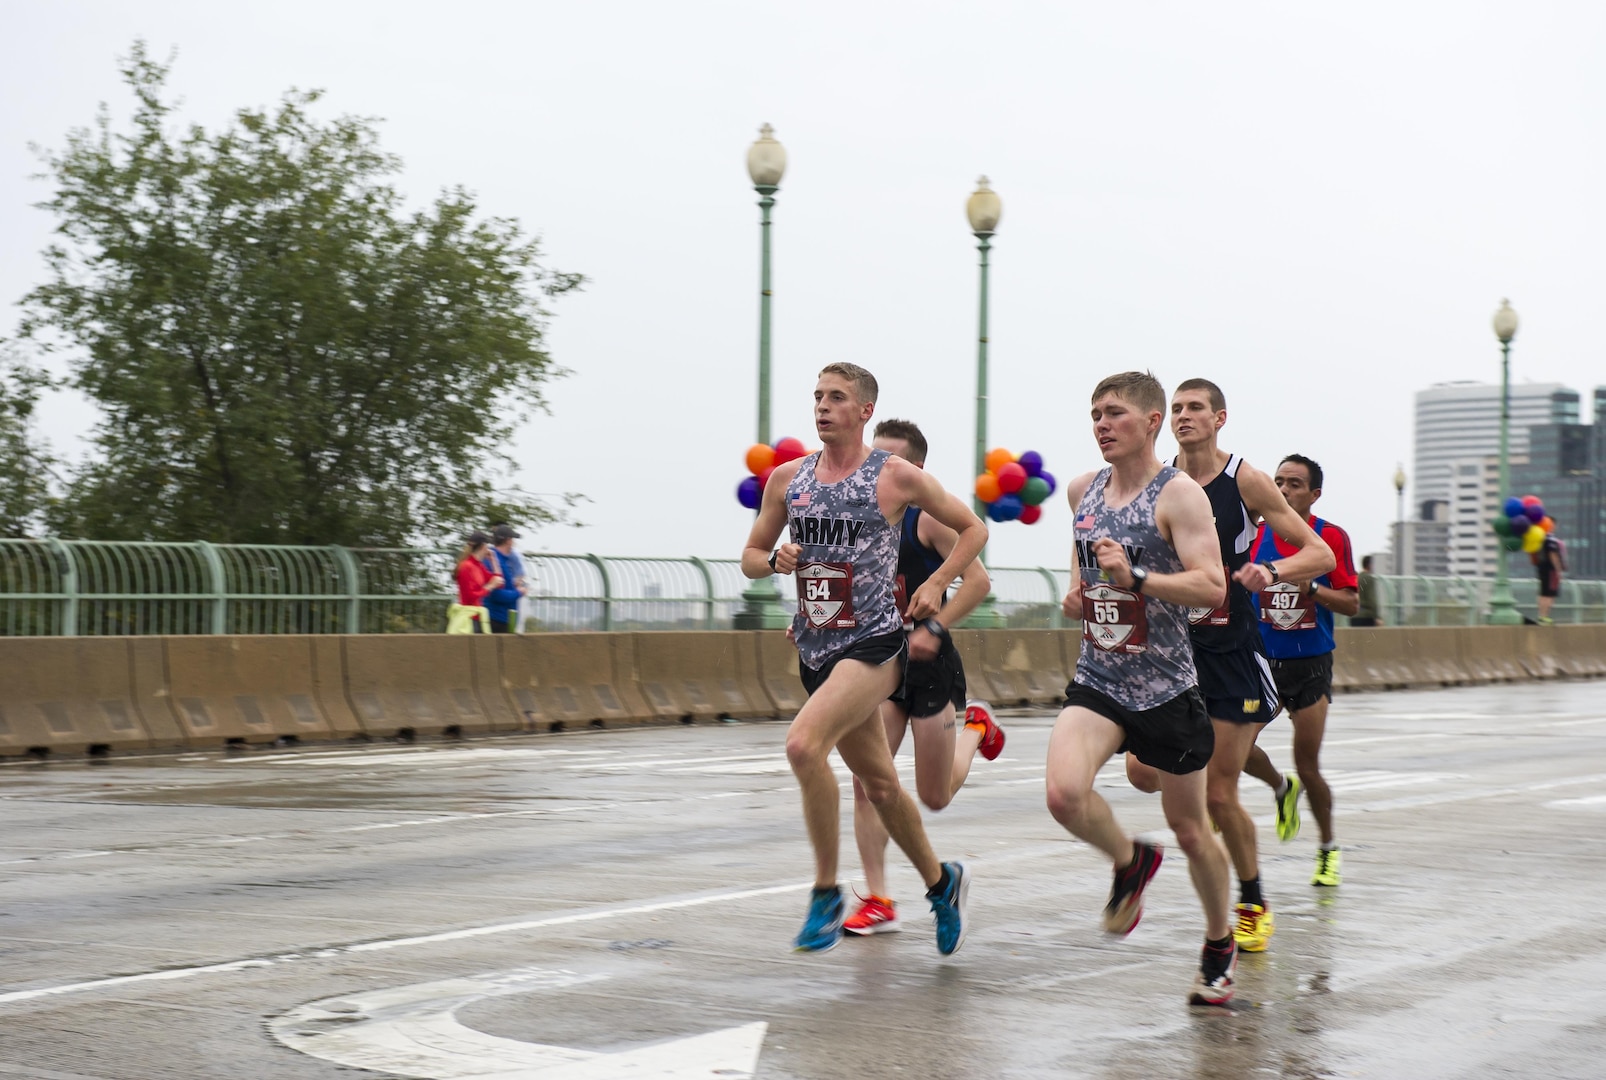 Two members of the U.S. Army Running Team, Trevor LaFontaine (#54) from Cornwall, N.Y., and Daniel Schlich (#55), from Saint Robert, Mo., cross the Francis Scott Key Bridge during the 40th Marine Corps Marathon near the 4-mile mark from Arlington, Va. into Georgetown in Washington, D.C., Oct. 25, 2015. LaFontaine, participating in his first marathon, went on take the first place male and overall win with a finish time of 2:24:25. Also known as "The People's Marathon," the 26.2 mile race drew roughly 30,000 participants to promote physical fitness, generate goodwill in the community, and showcase the organizational skills of the Marine Corps. (U.S. Marine Corps photo by Kathy Reesey/Released)